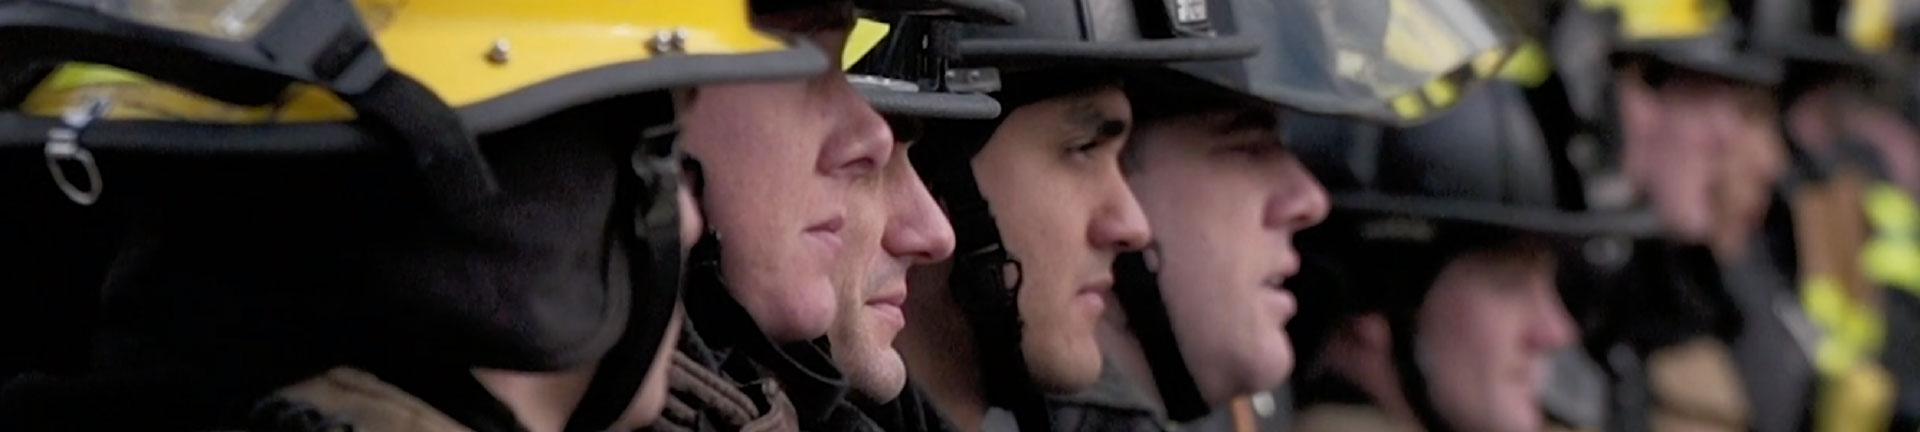 line of firefighters